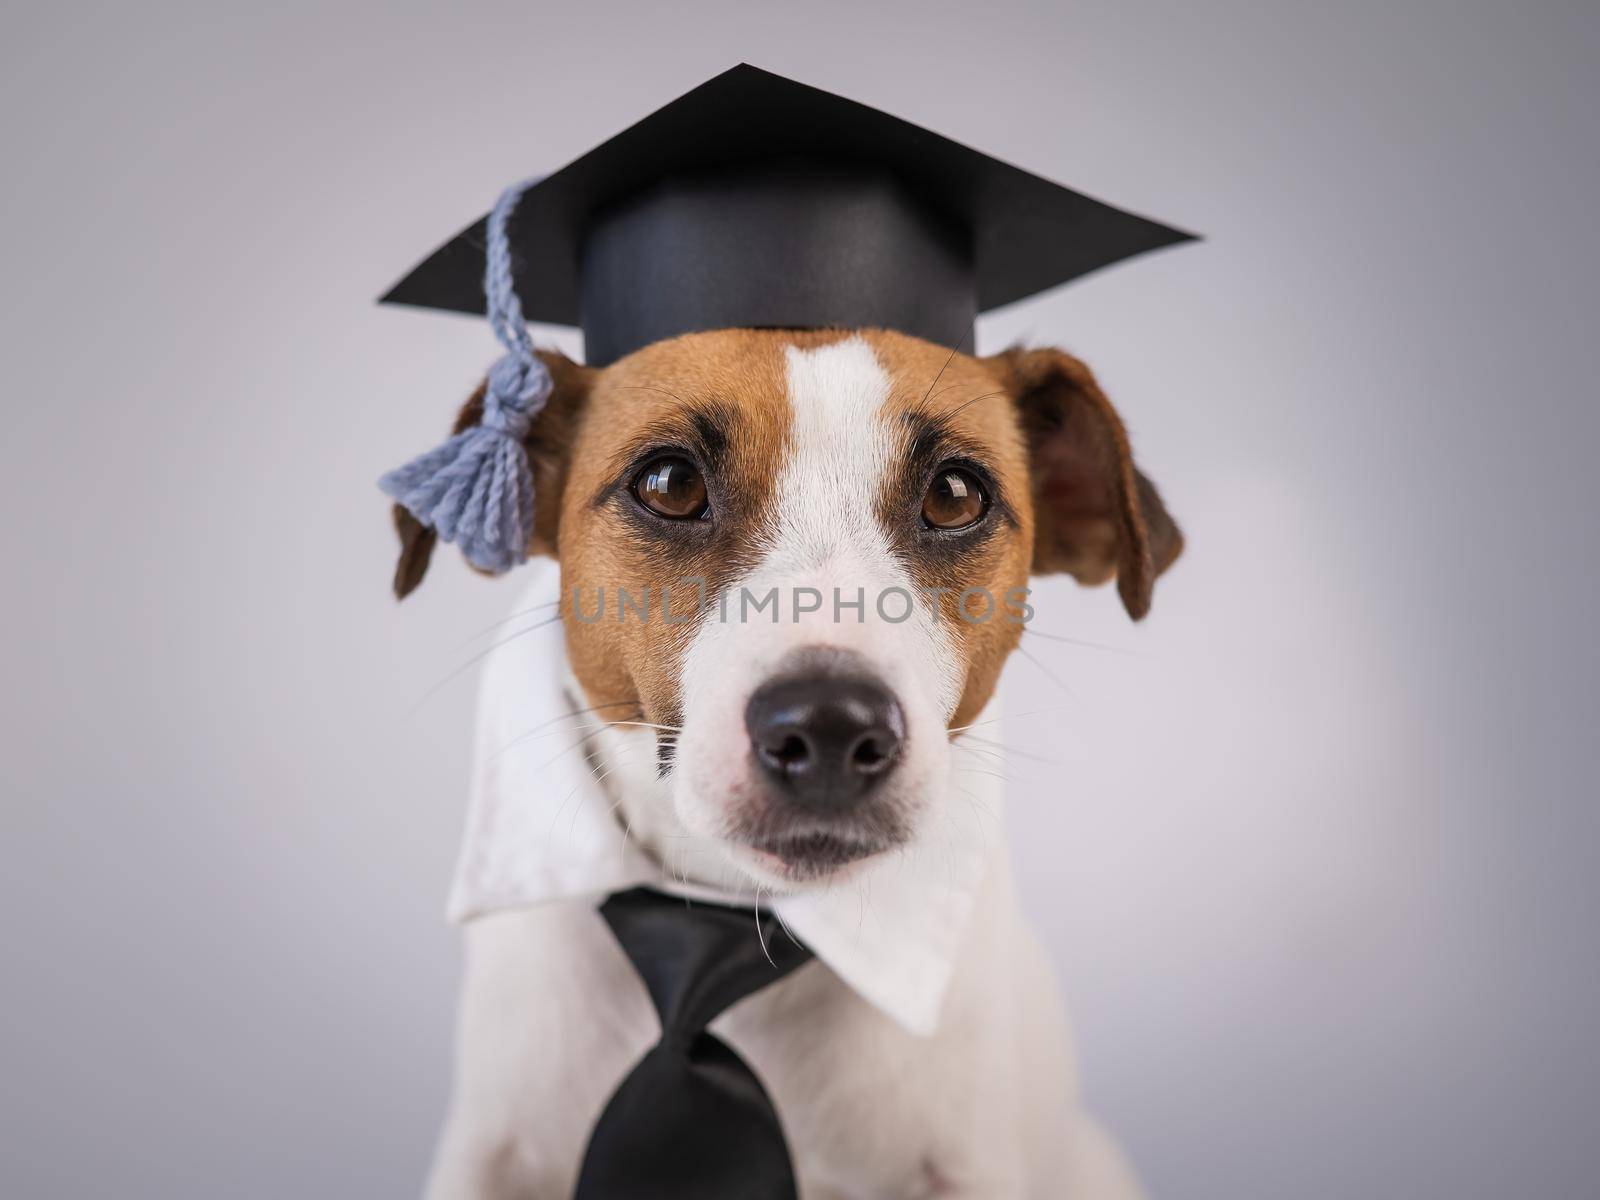 Jack Russell Terrier dog dressed in a tie and an academic cap in front of a white background. by mrwed54